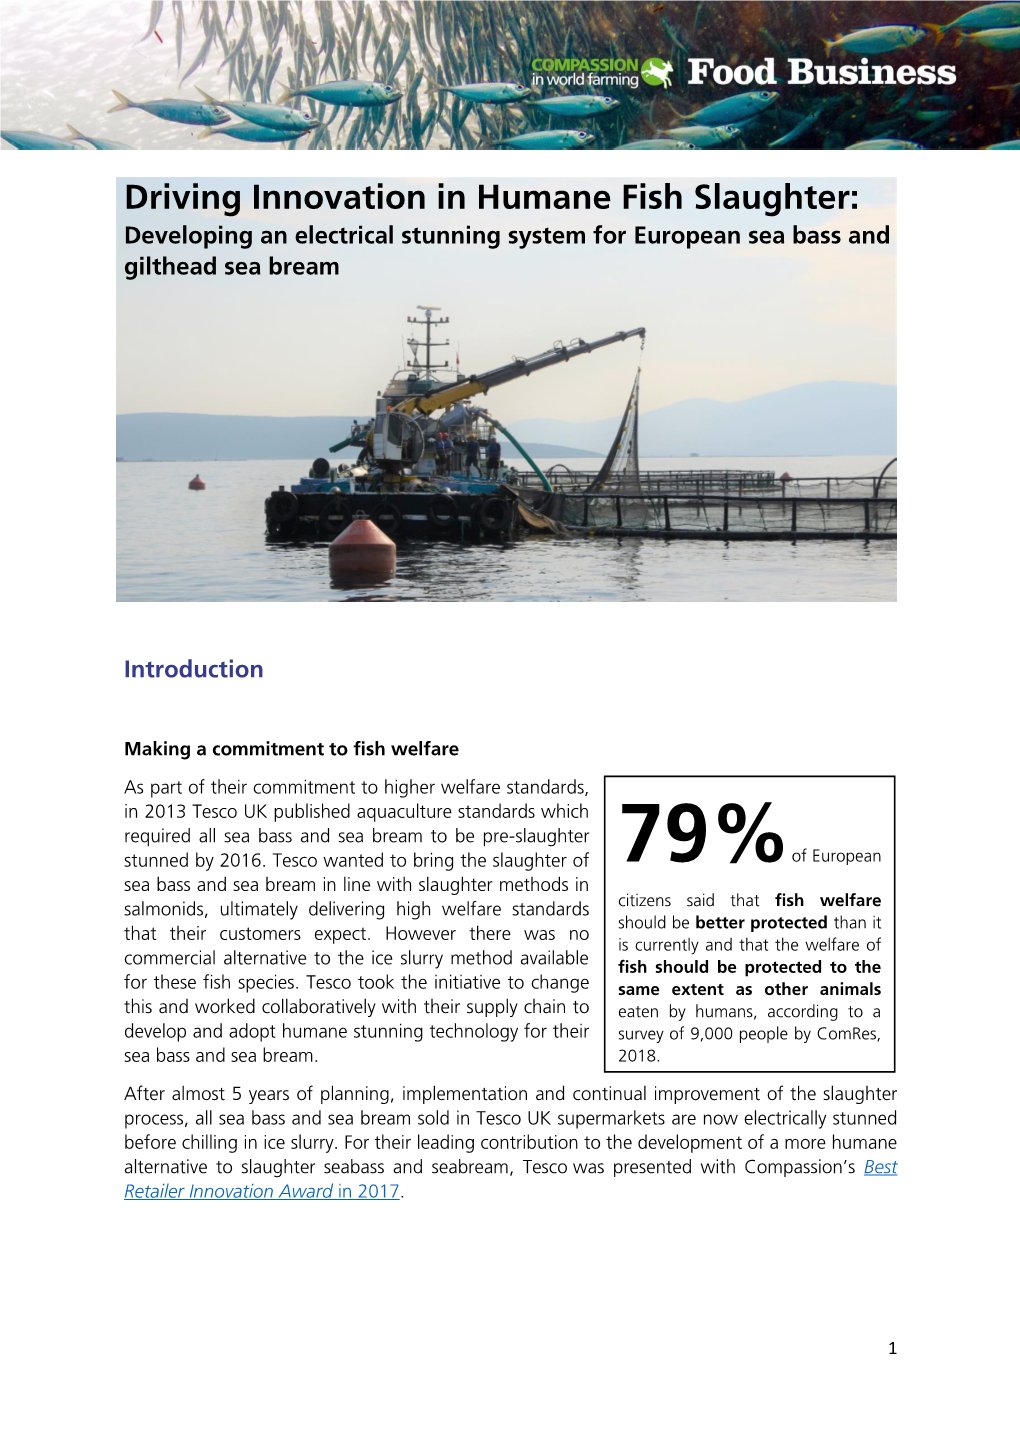 Driving Innovation in Humane Fish Slaughter: Developing an Electrical Stunning System for European Sea Bass and Gilthead Sea Bream